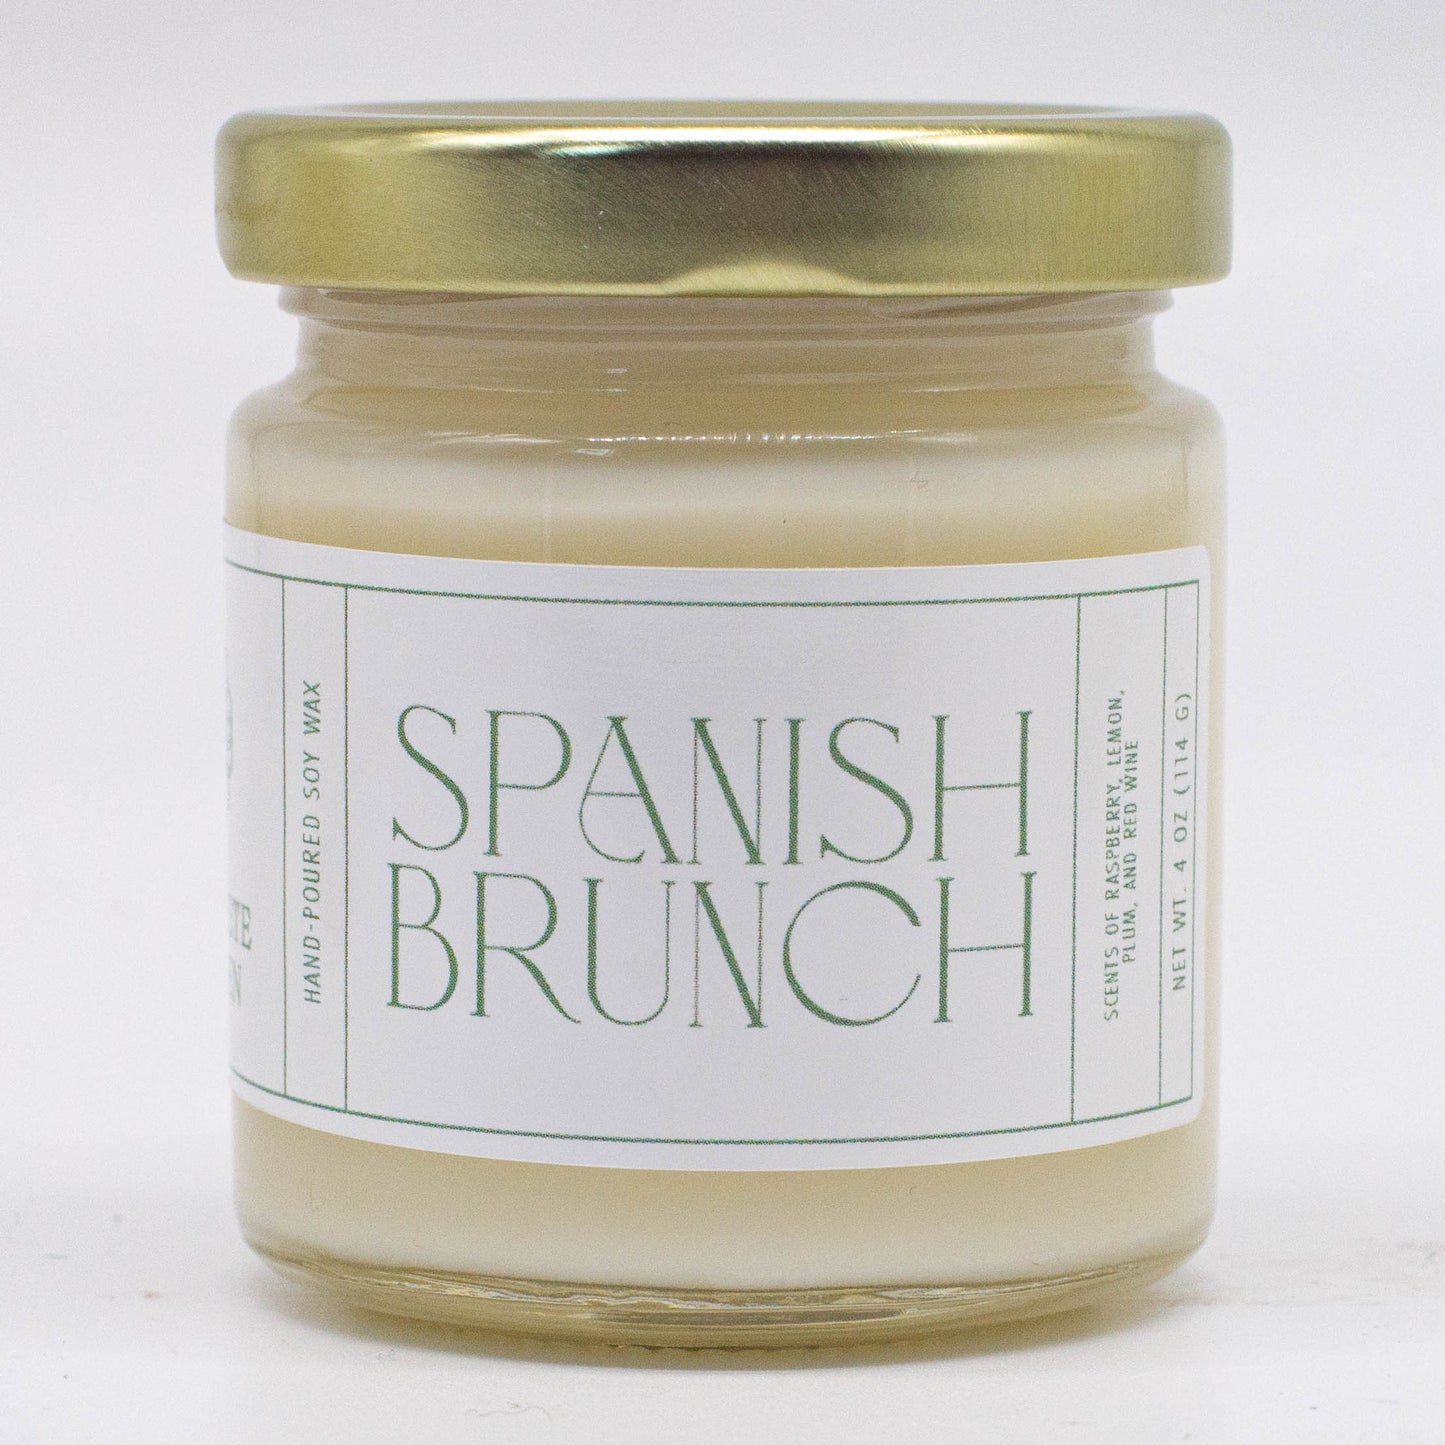 Spanish Brunch, Raspberry and Red Wine Soy Candle, 4 oz